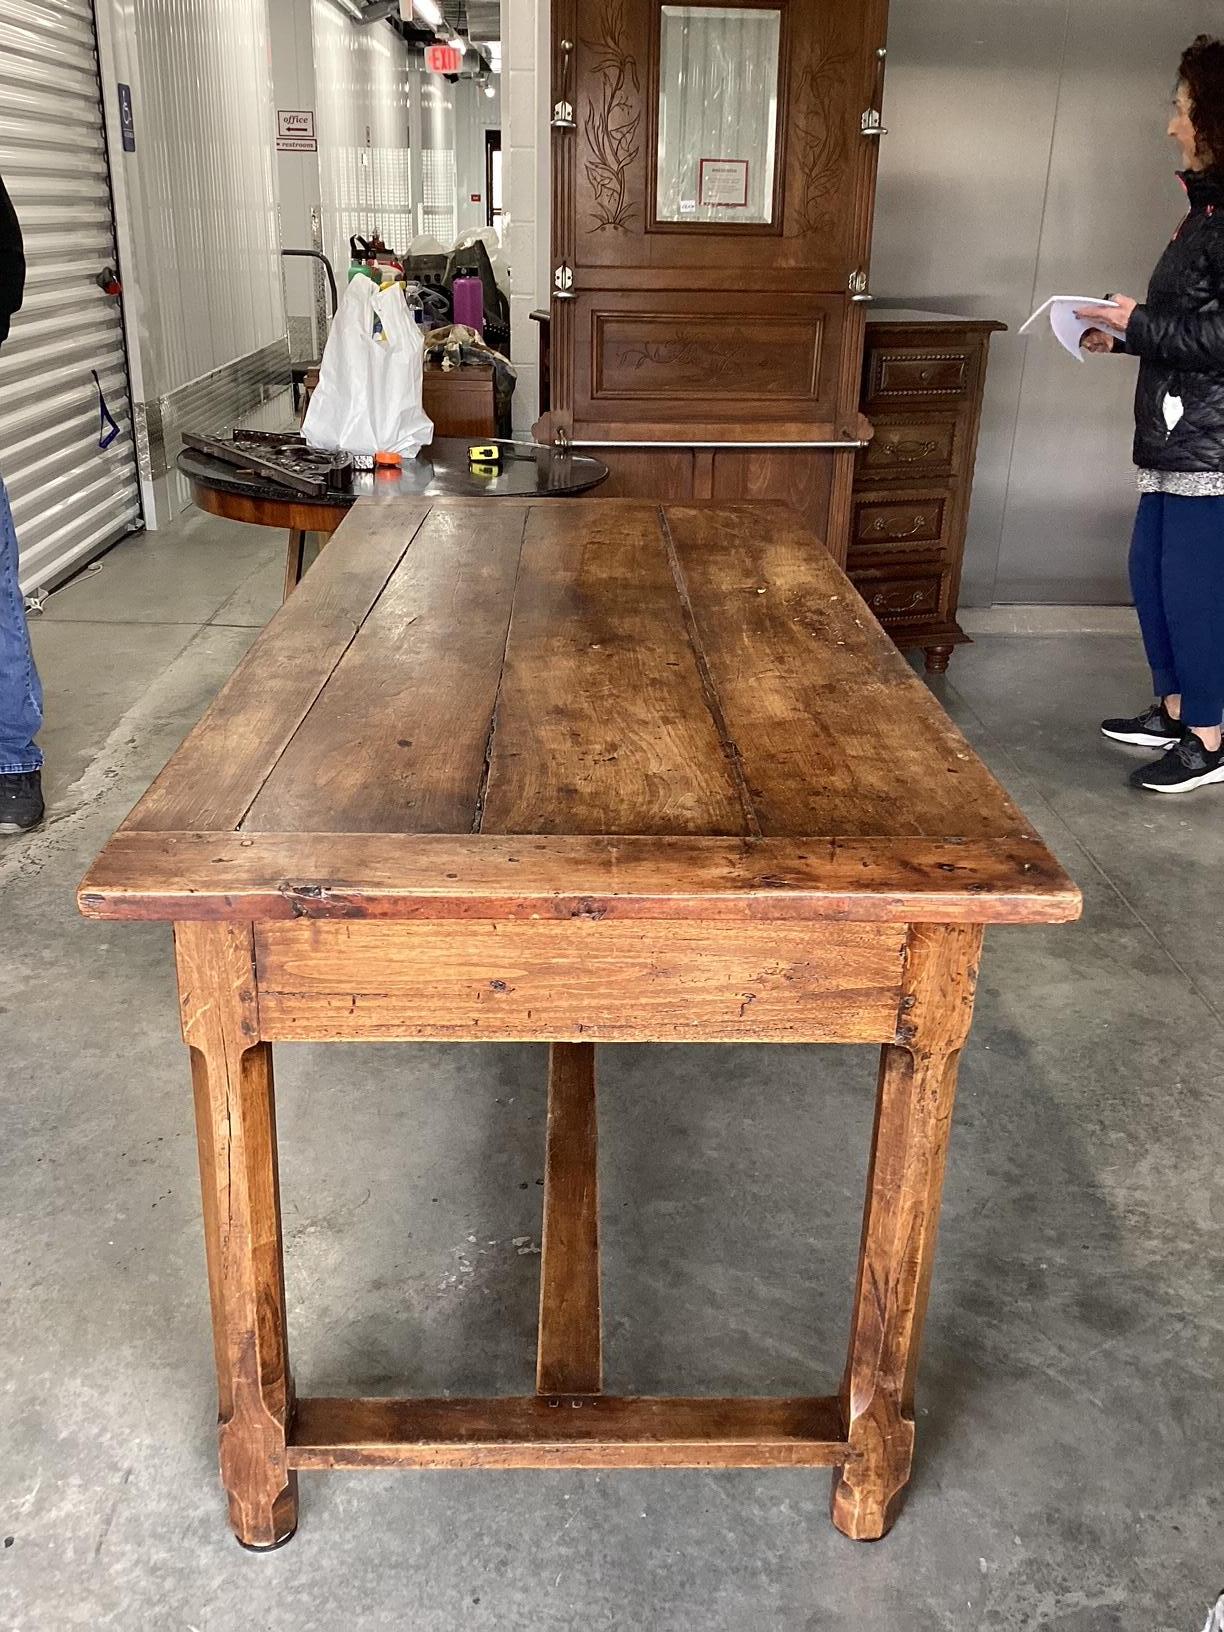 If you love true rustic furniture, this is the table for you. Made in the late 1800's in Brittany, France, this table was originally used as a work table in a kitchen. It also served as a table for dining with long benches on either side. The top is